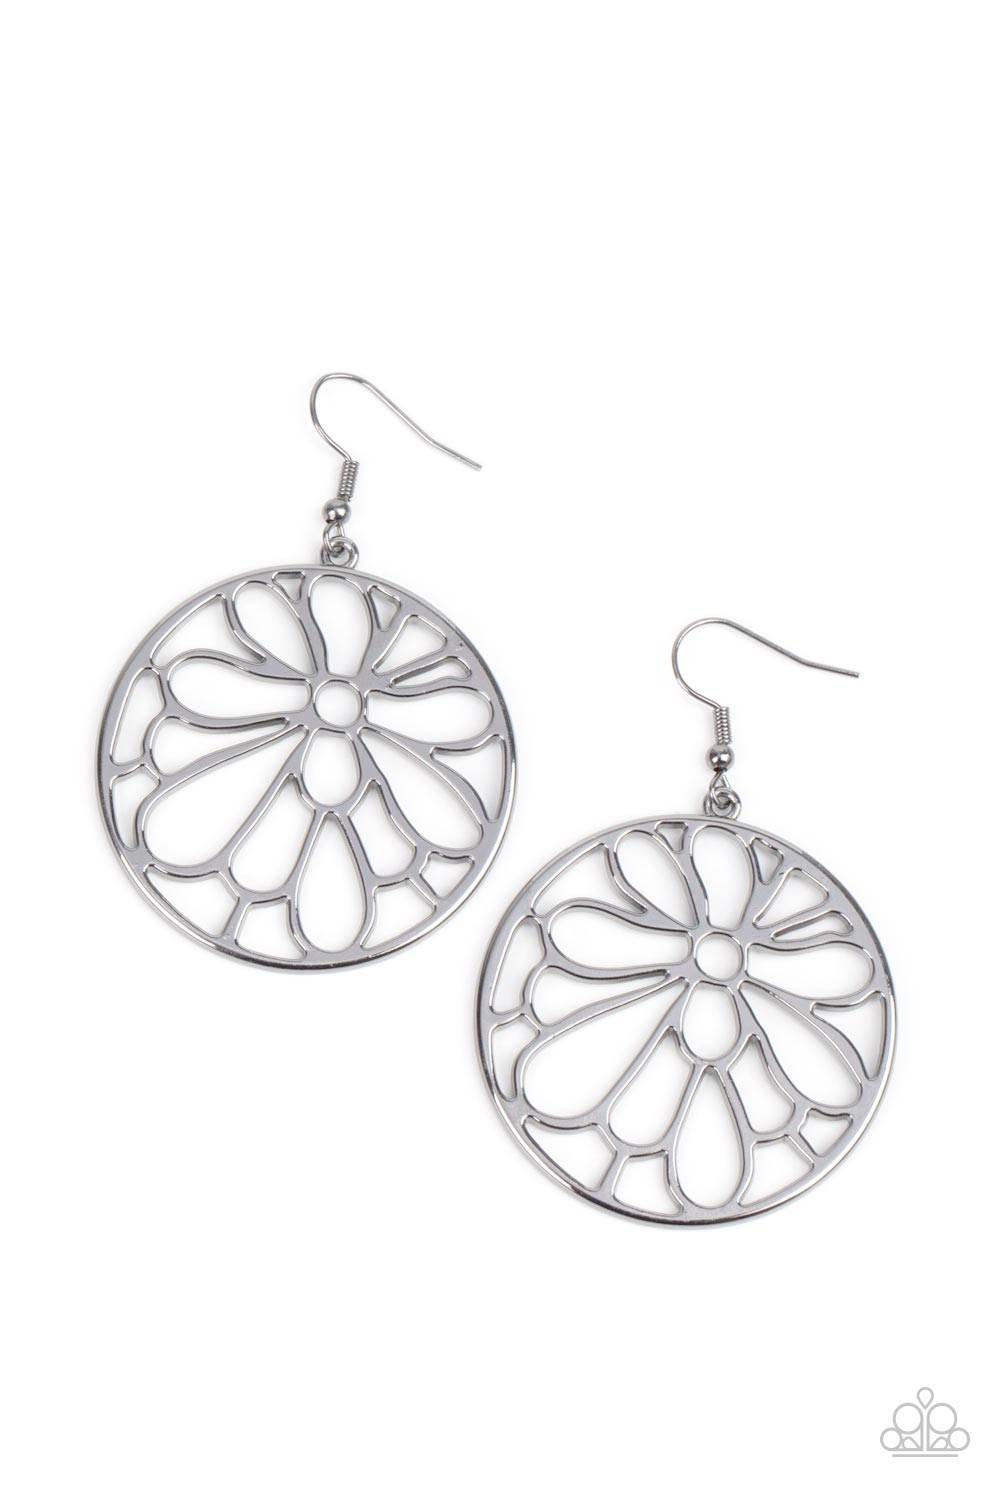 Glowing Glades - silver - Paparazzi earrings